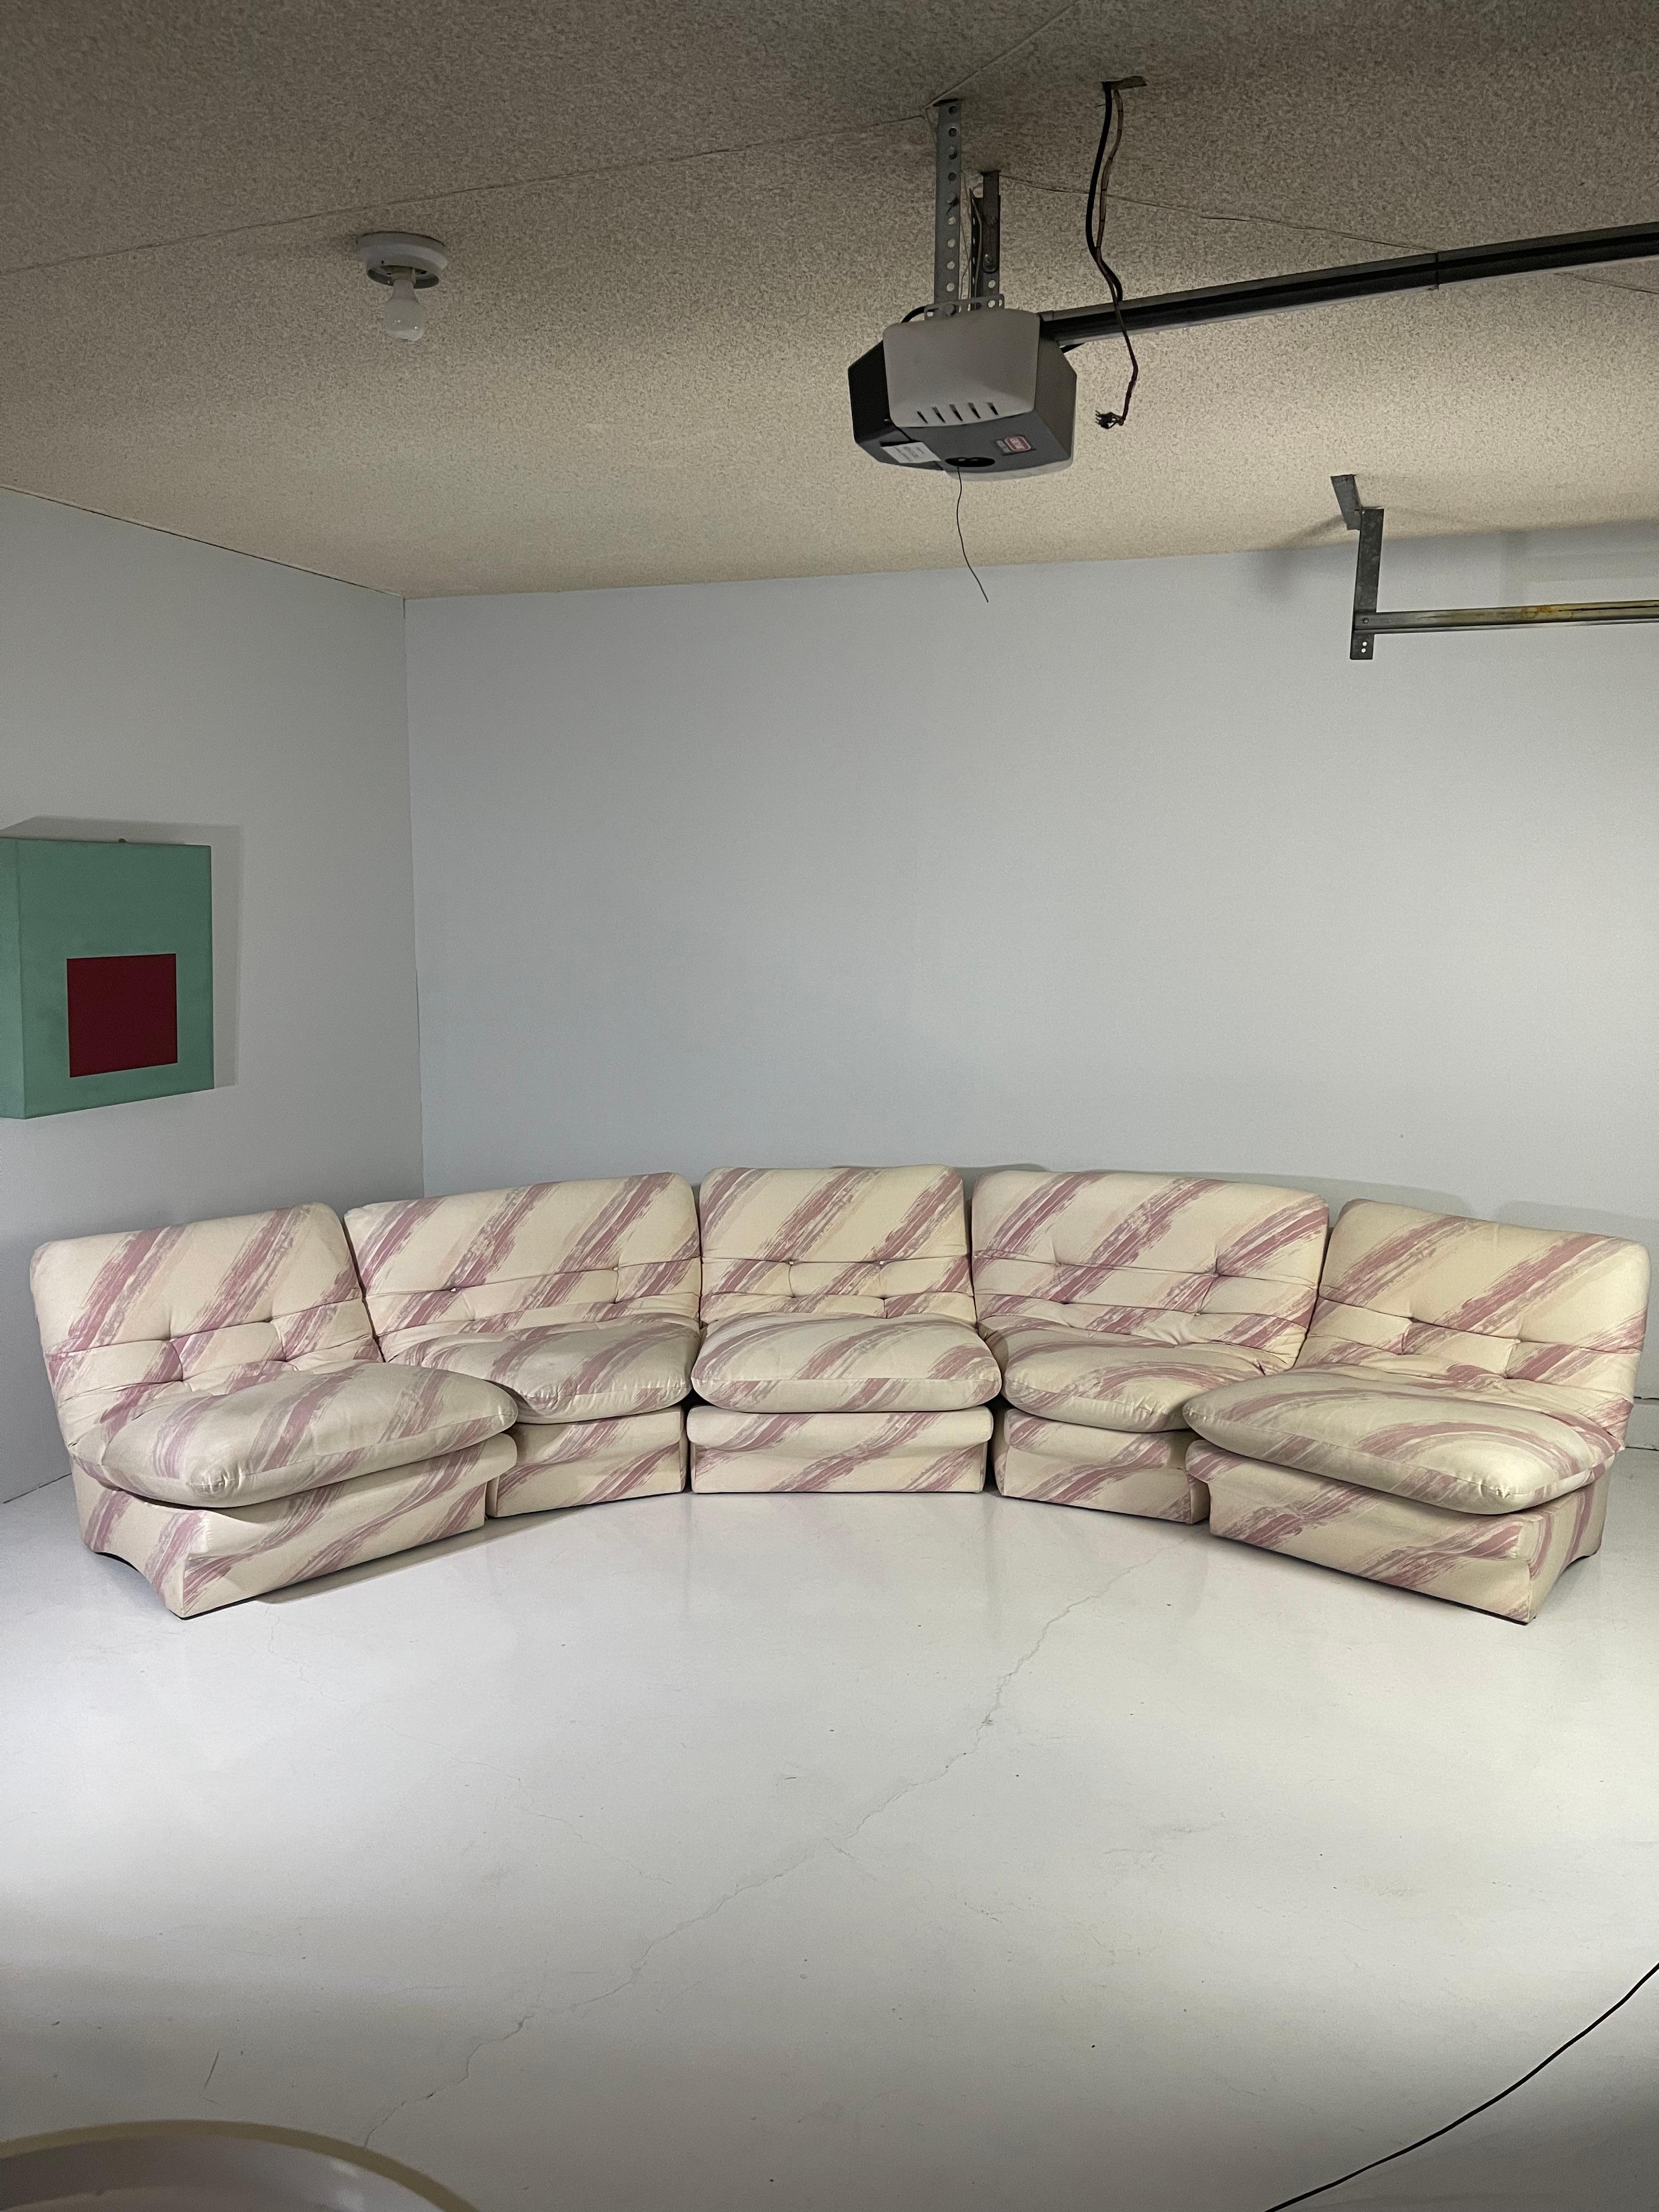 5 Piece modular sectional for Preview, 1980s. 3 straight and 2 curved elements. Sleek and low-profile this modular sectional works great as one piece or broken up into multiple seating arrangements. Removable cushions and covers. 162” corner to